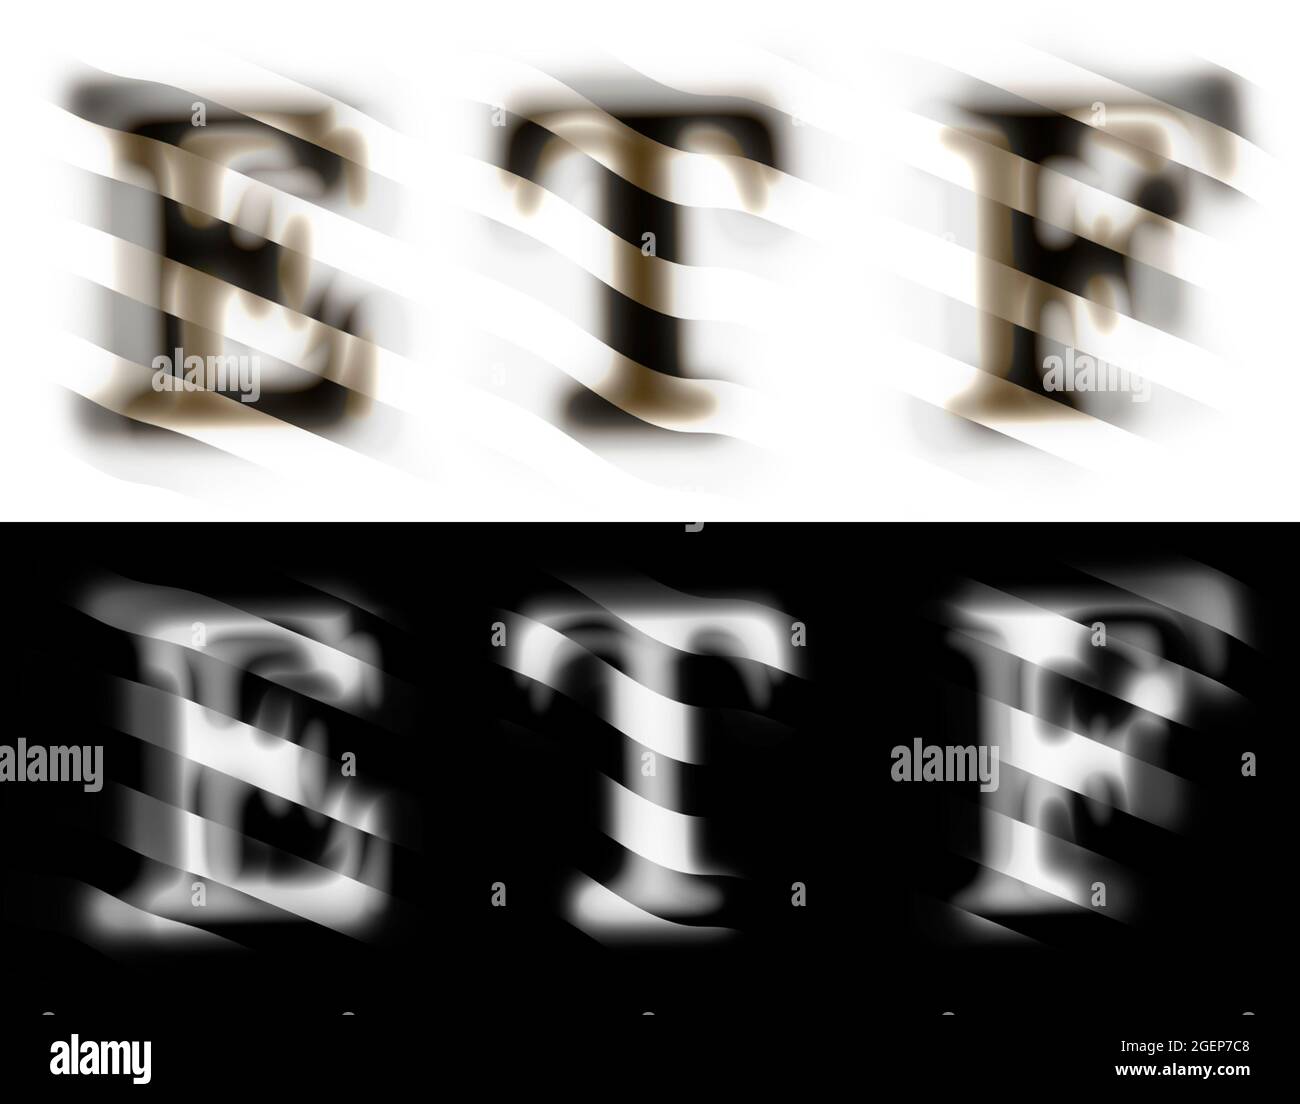 ETF exchange traded funds text. Striped defocused letters isolated on black and white background. Stock Photo